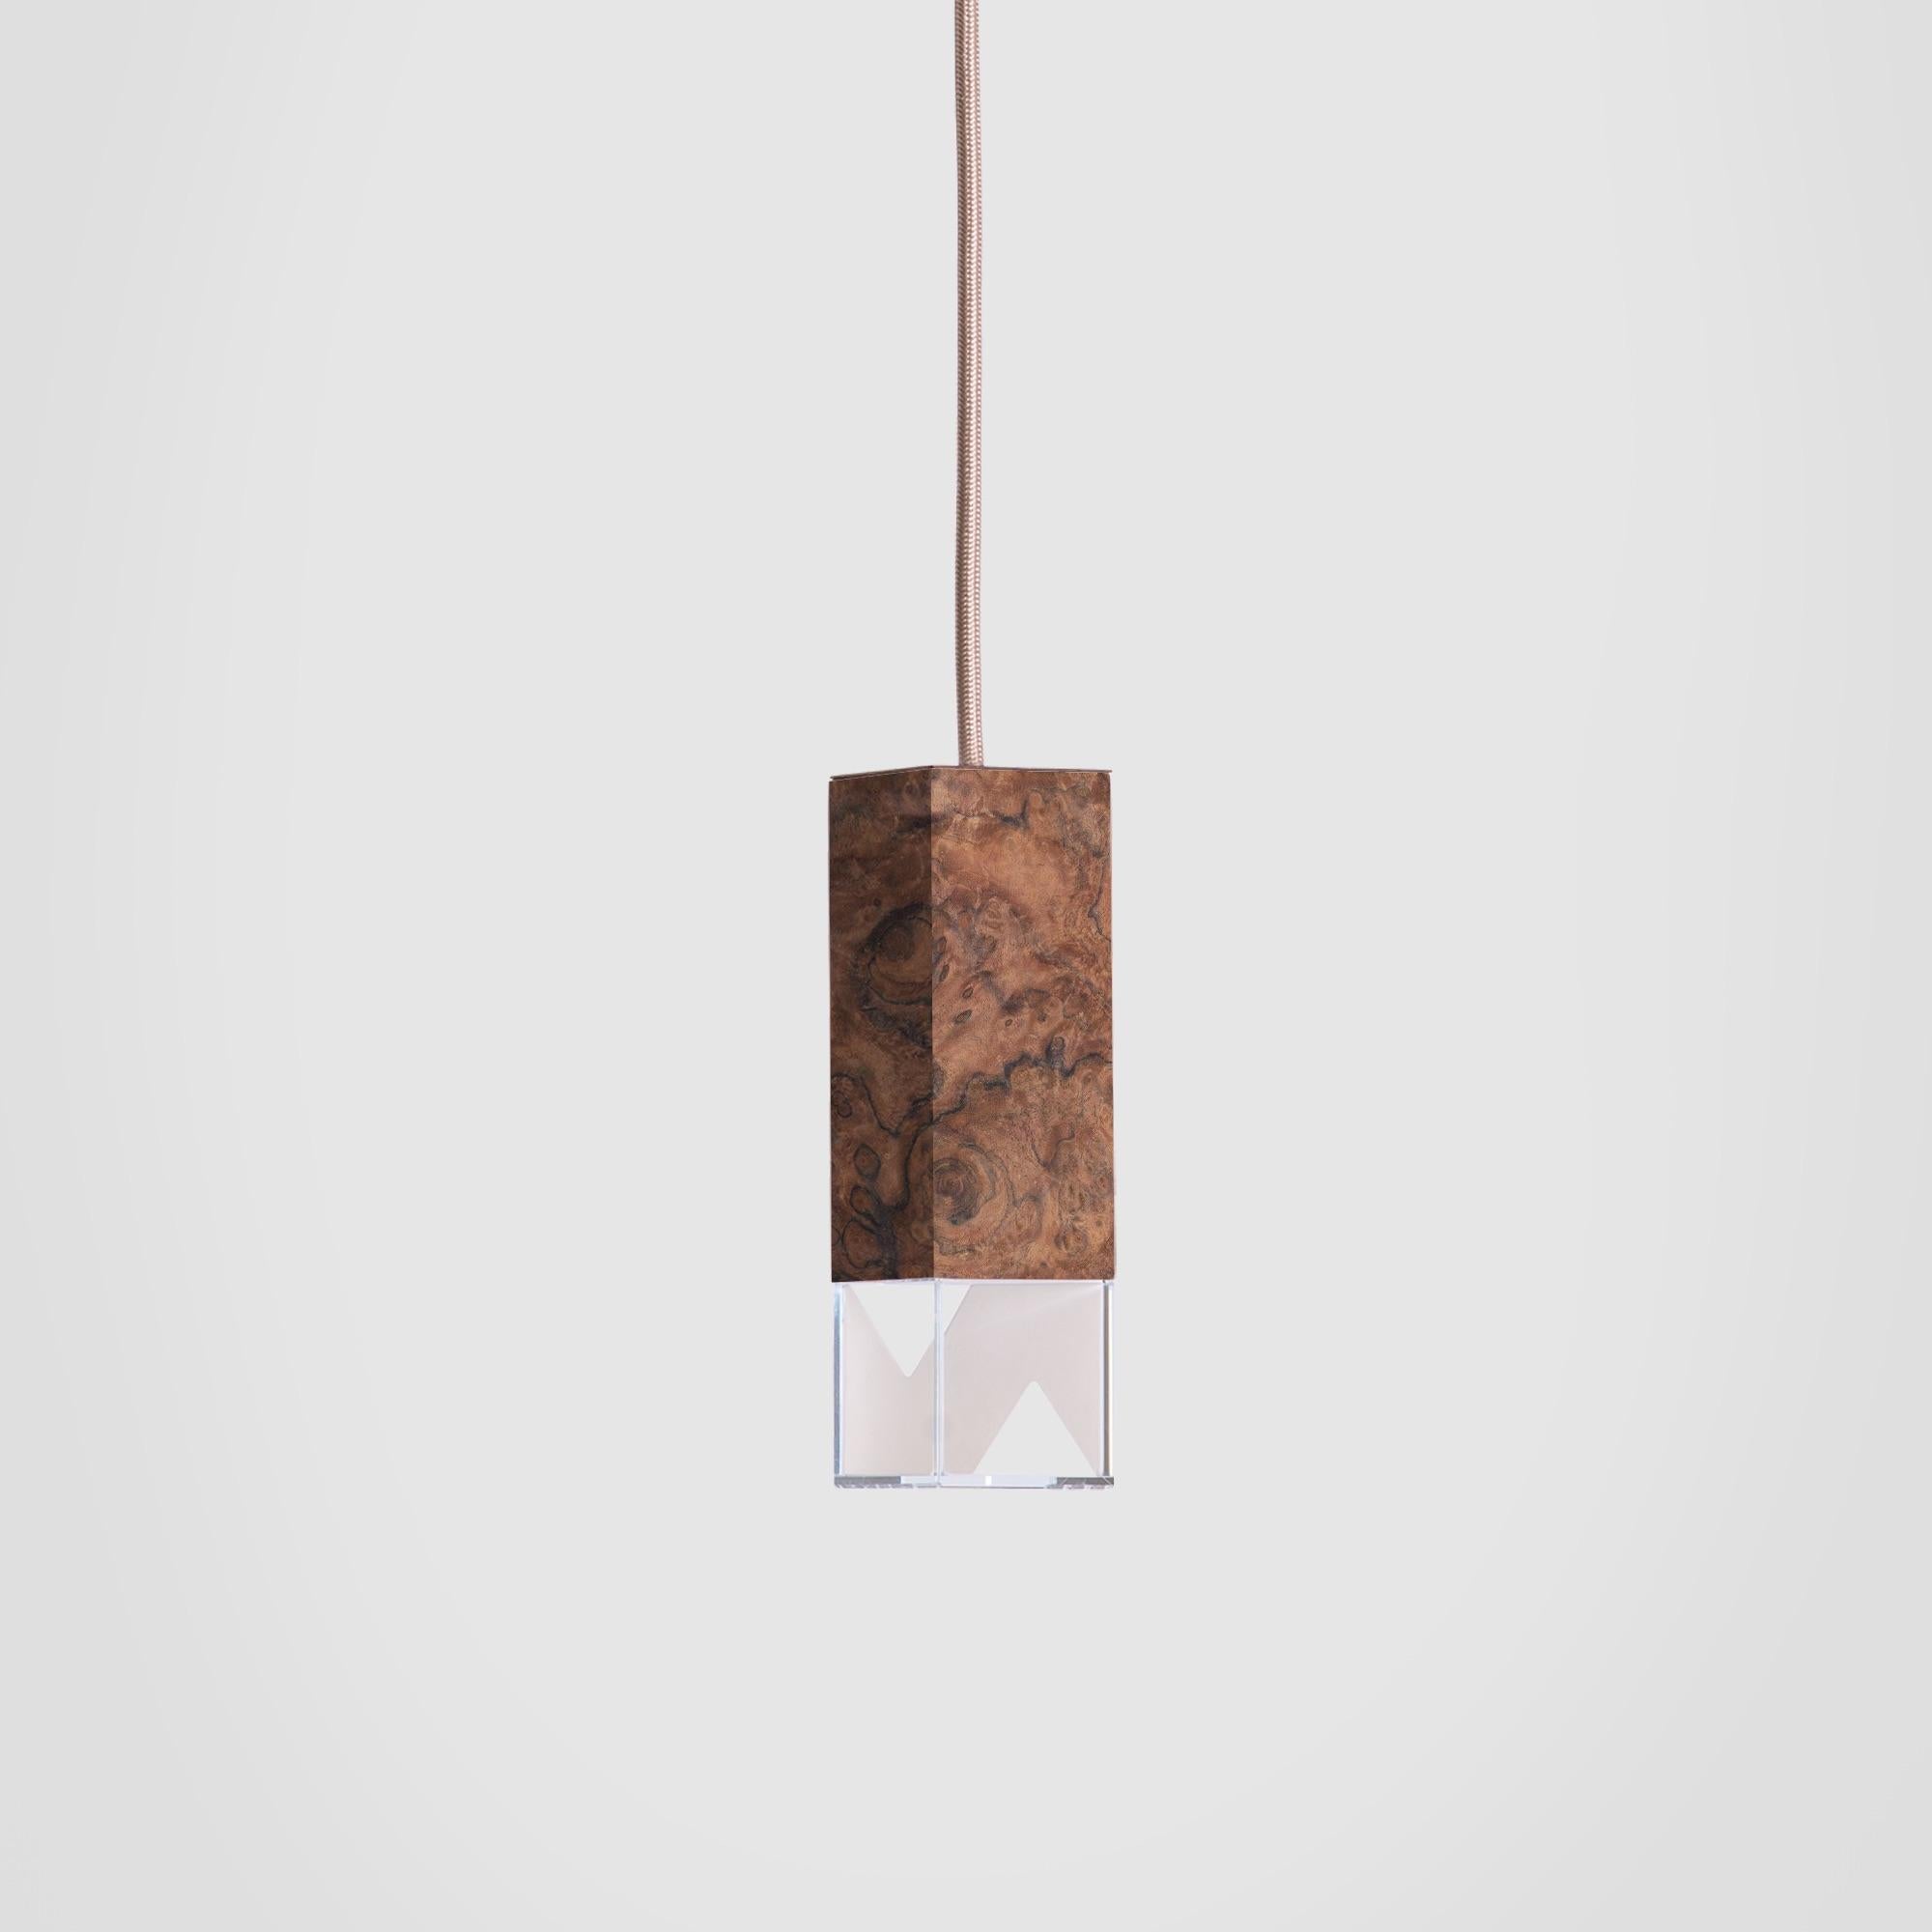 About
Suspended Minimal Modern Walnut Wood Light by Formaminima

Lamp/One Wood Revamp 02 Edition
Design by Formaminima
Single Pendant
Materials:
Body lamp handcrafted in walnut briarwood / crystal glass diffuser hosting Limoges biscuit-finish